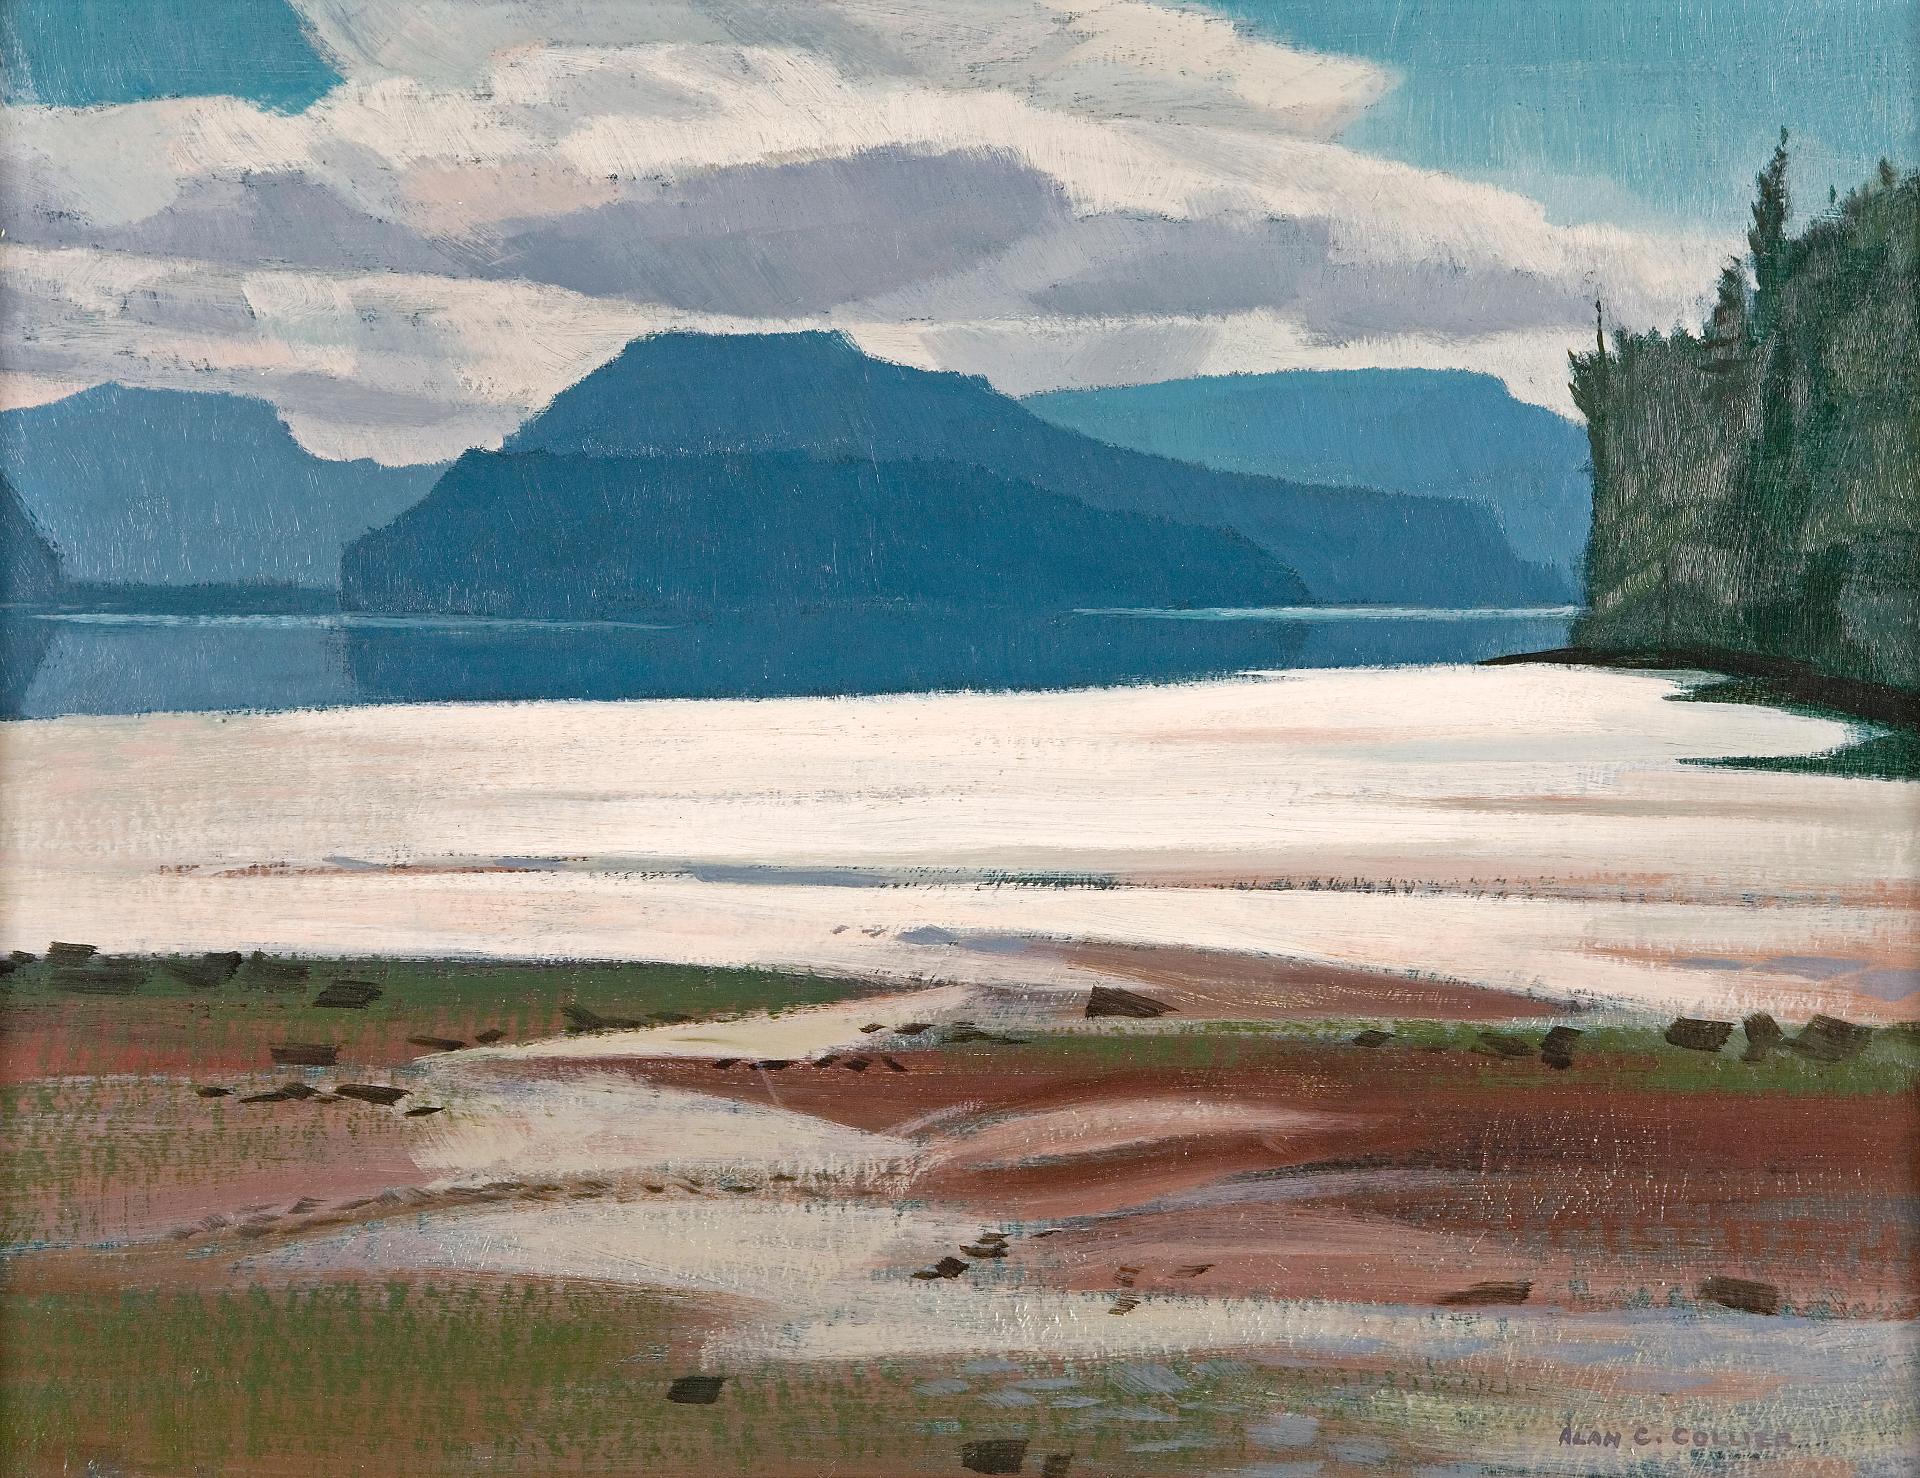 Alan Caswell Collier (1911-1990) - Low Tide, Grise Bay, Vancouver Island B.C.